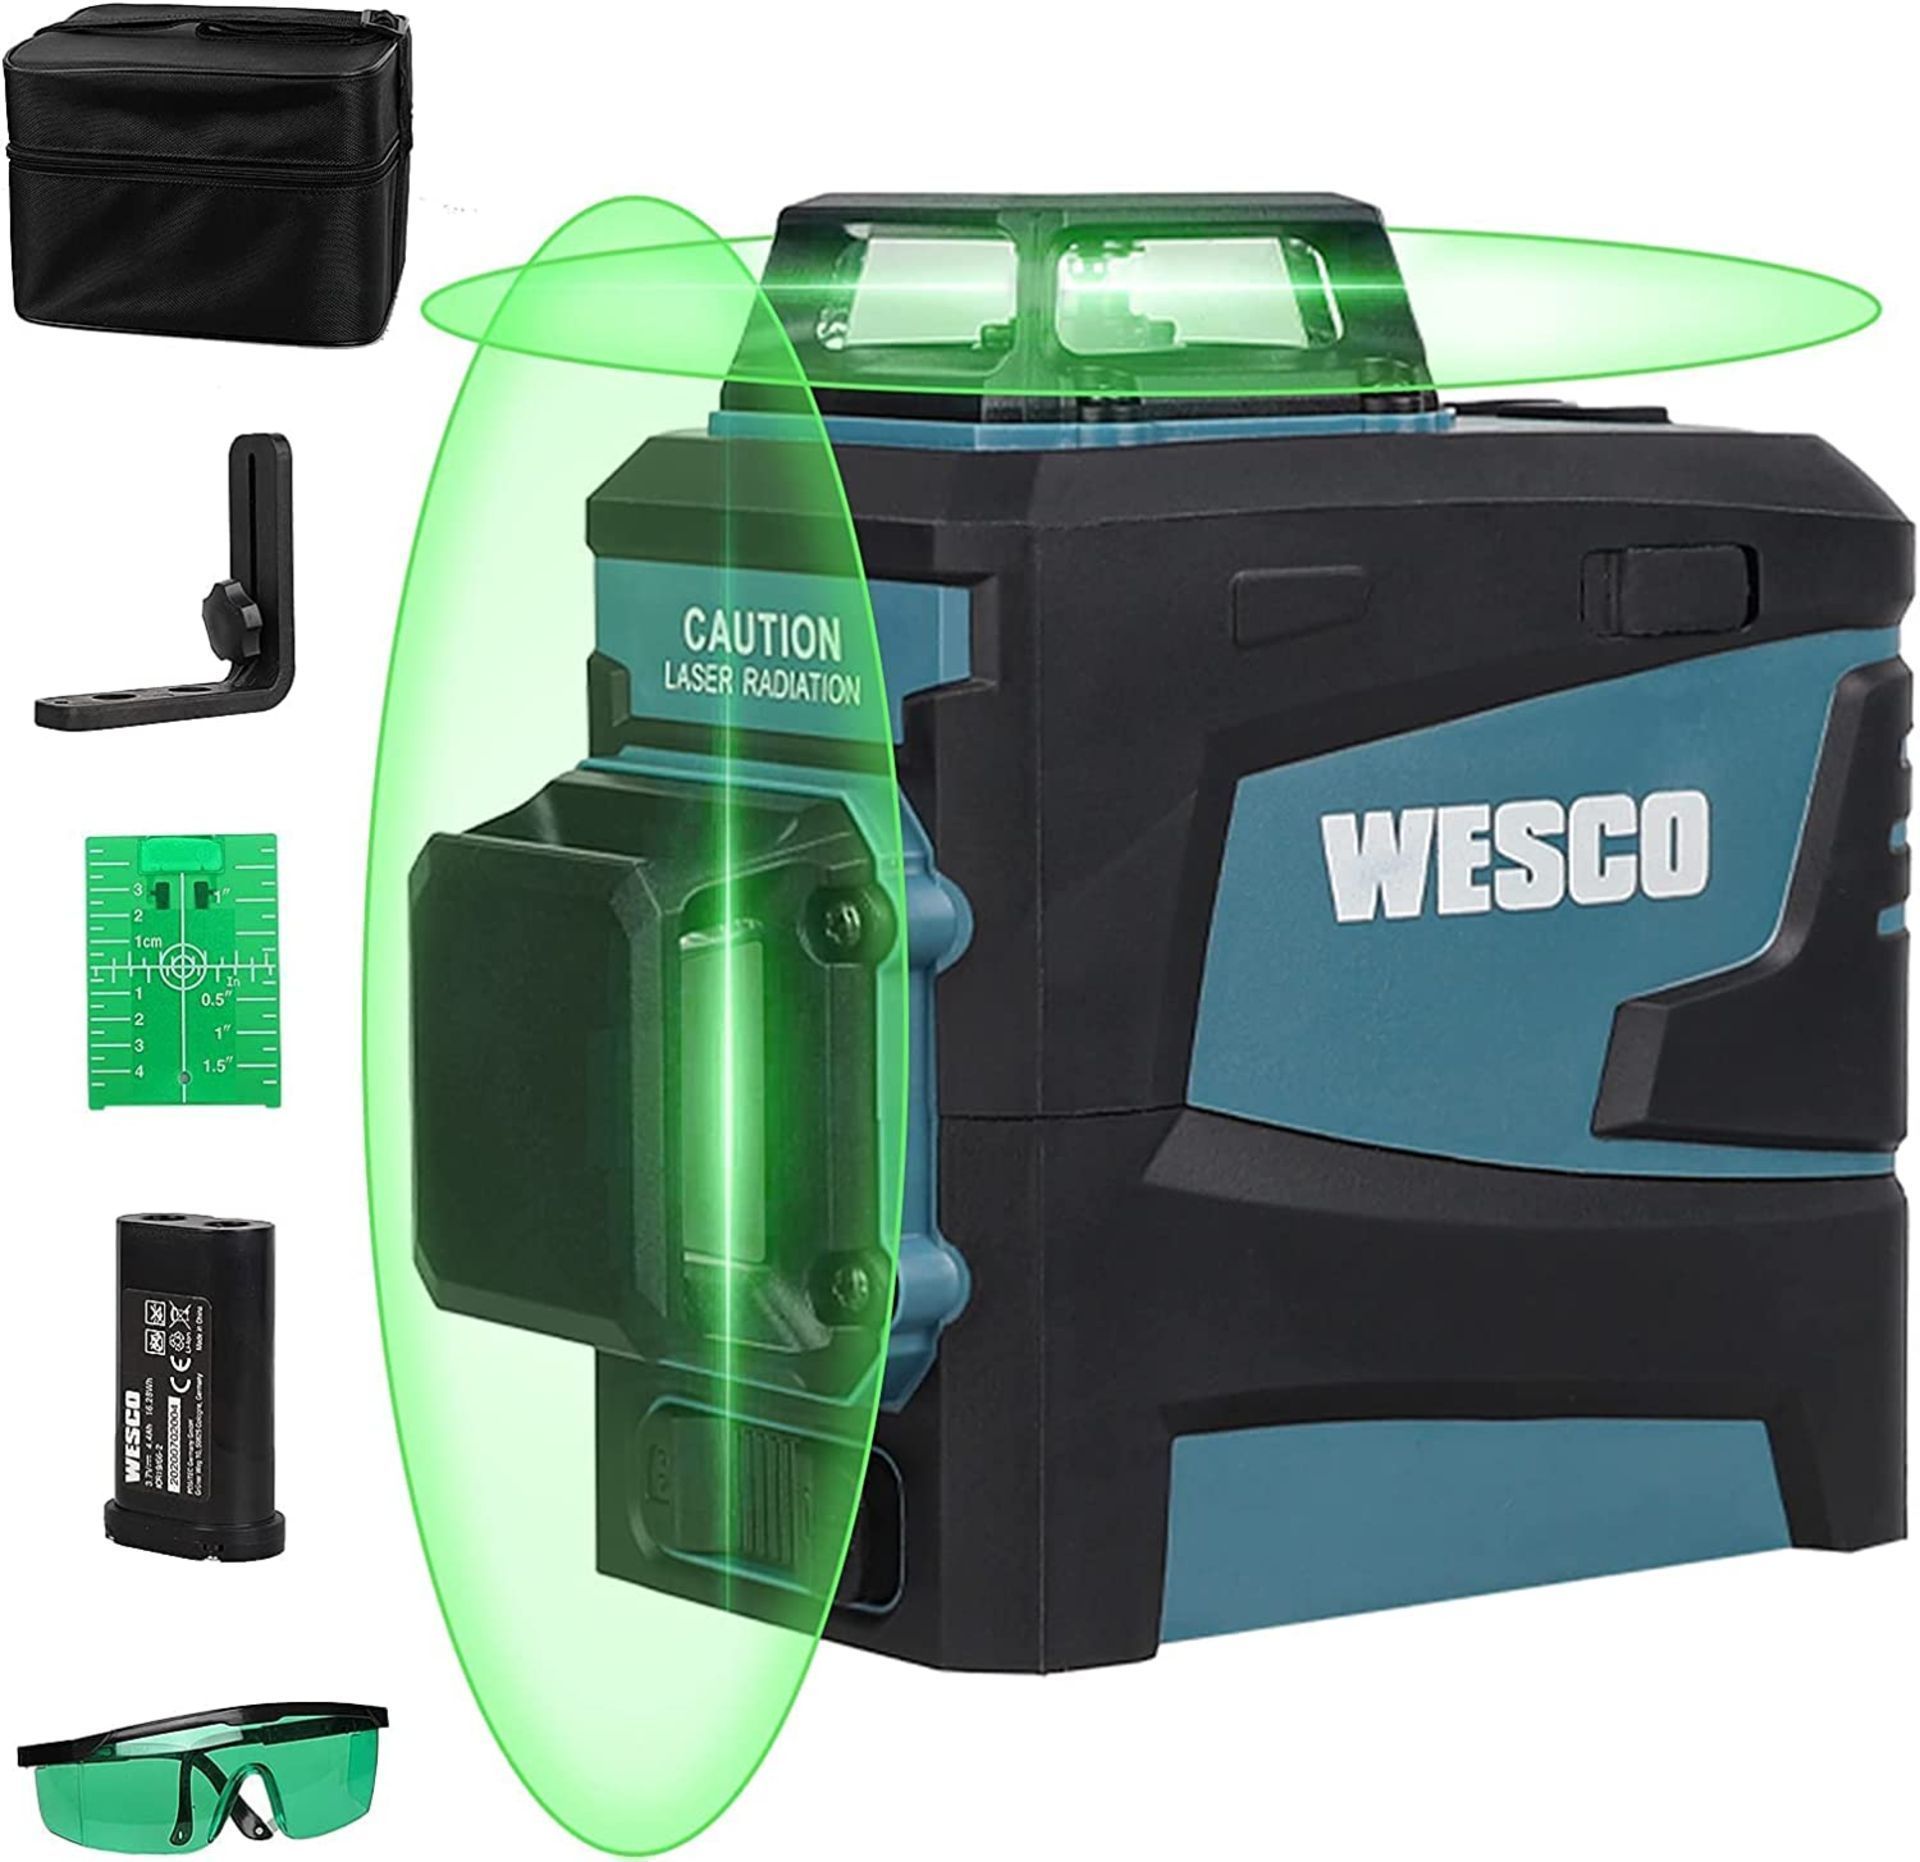 New & Boxed WESCO 3D Cross Line Laser Level, 65ft Green Laser Tool, Manual and Automatic Mode, - Image 2 of 2